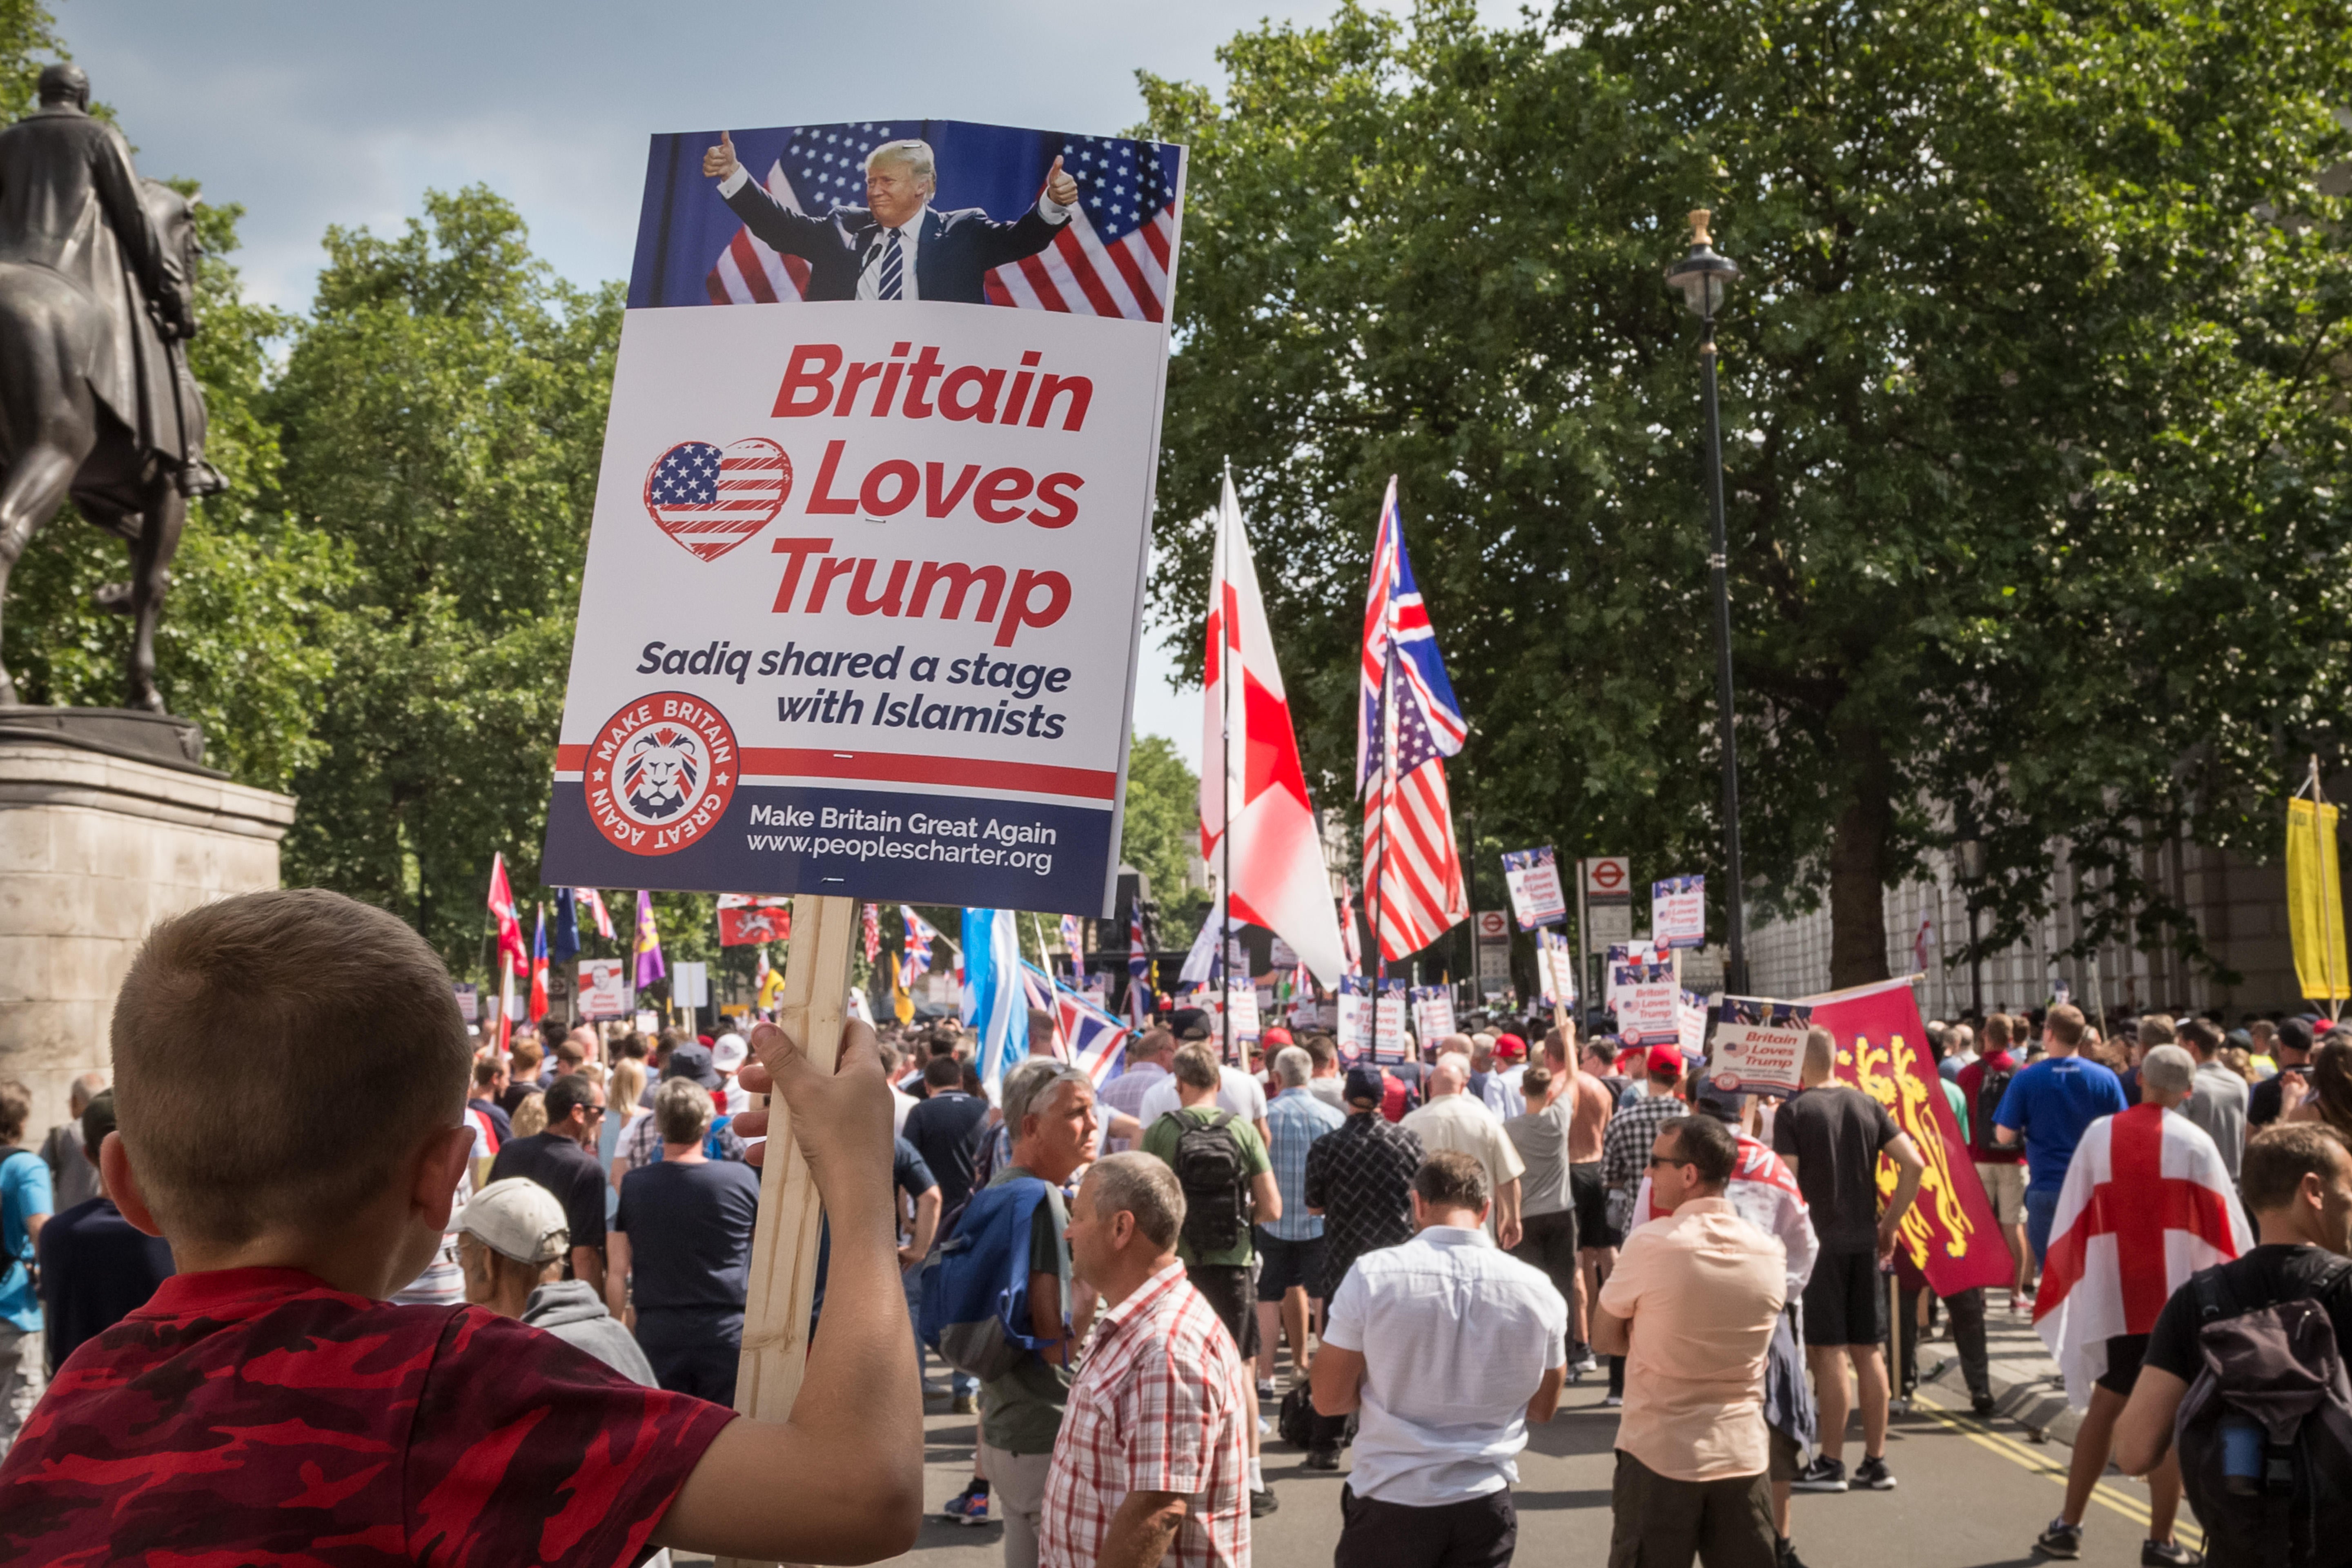 A child holds placard by Ukip affiliate ‘Make Britain Great Again’ at a 2018 protest in London